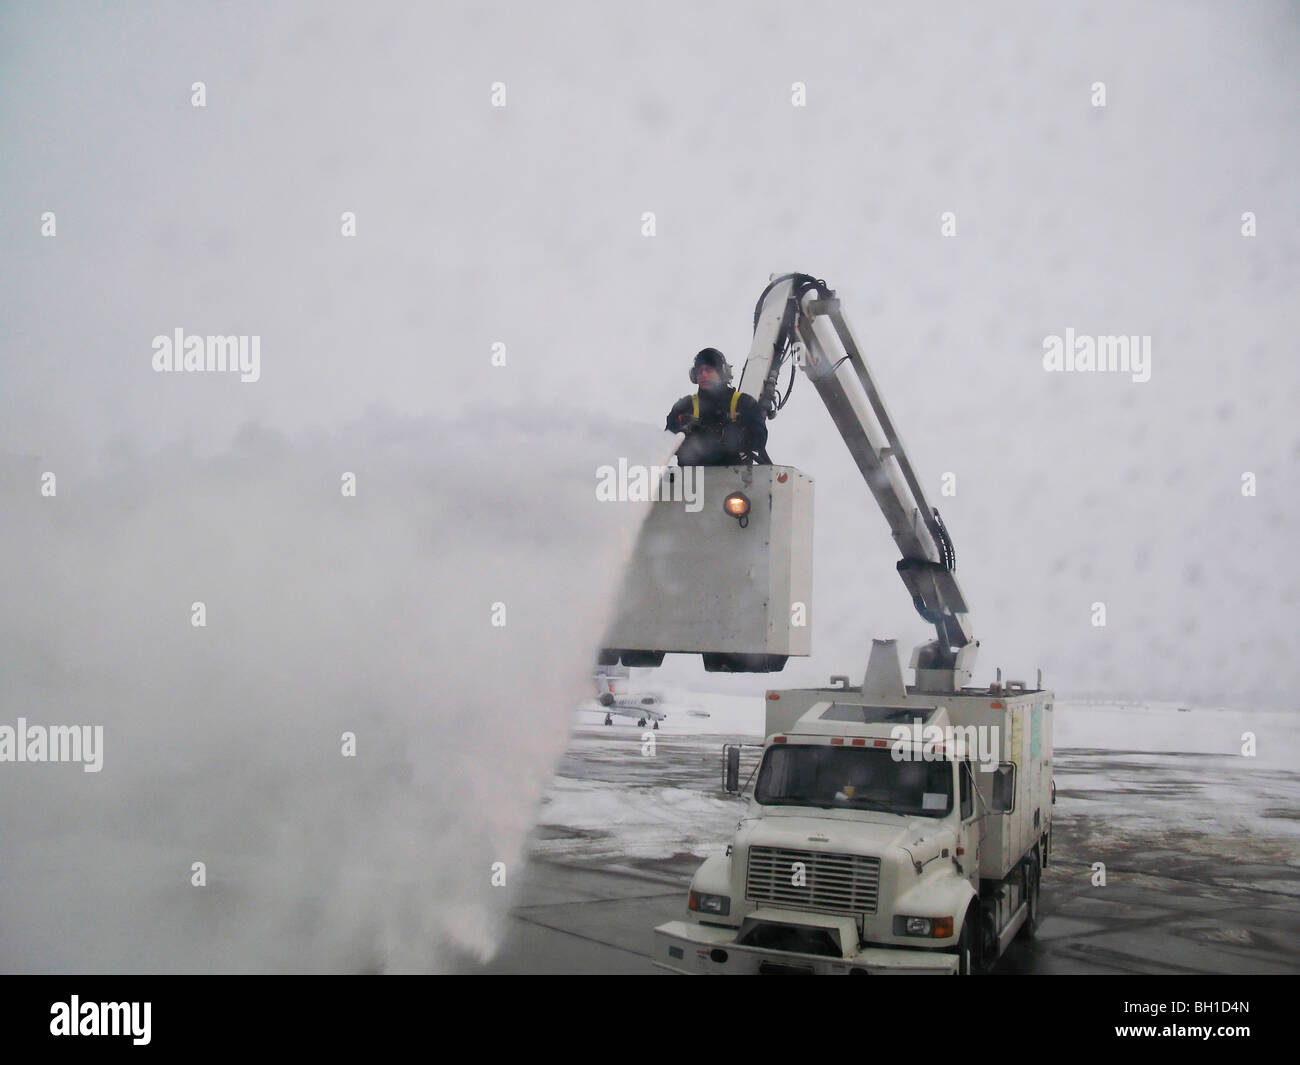 De-icing a plane in winter at the airport Stock Photo